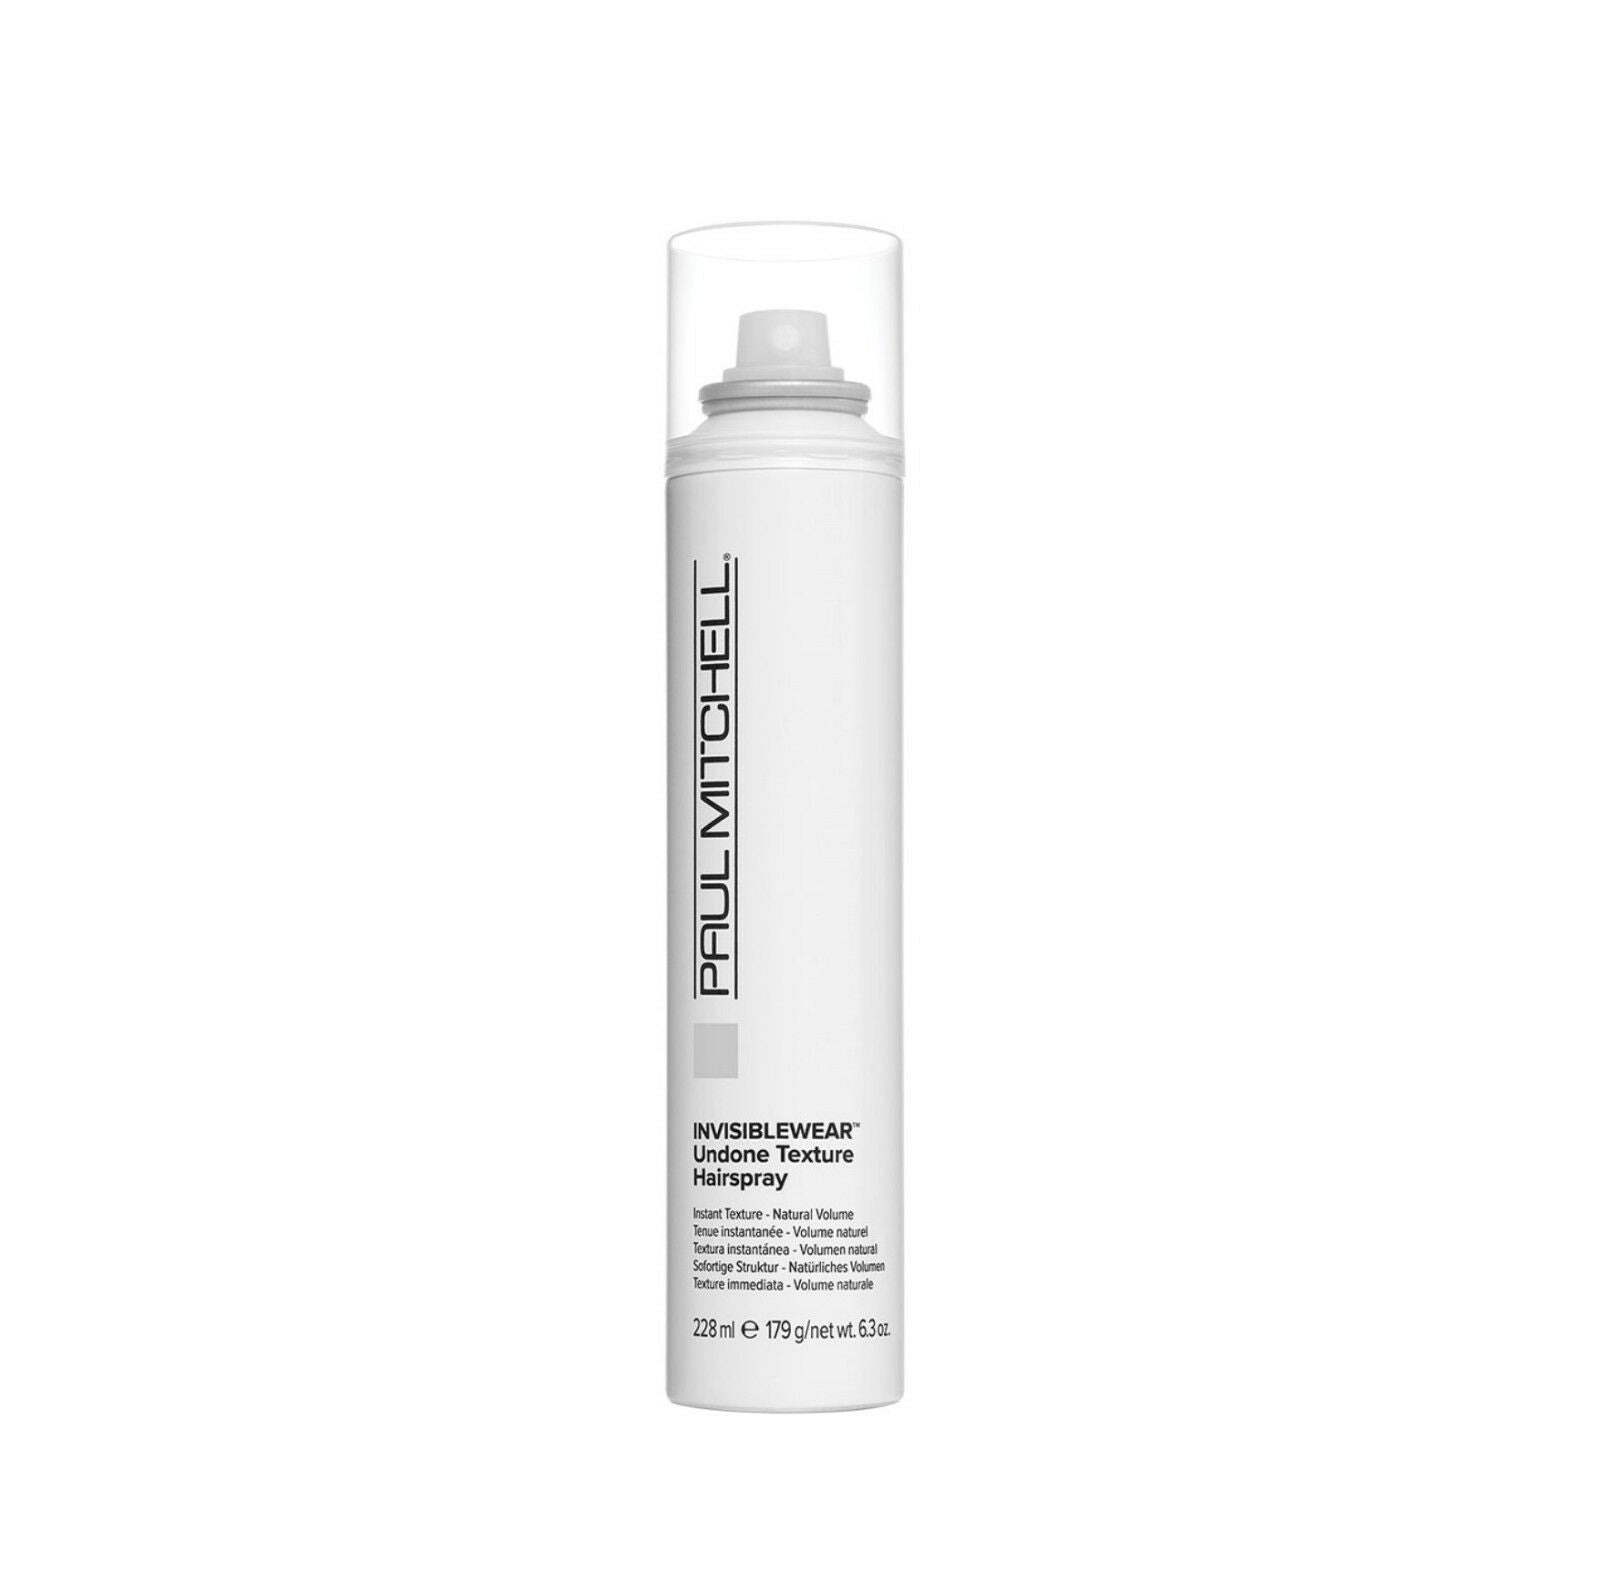 Paul Mitchell Invisiblewear Undone Texture Hairspray Instant Textu Duo 228ml x 2 - On Line Hair Depot